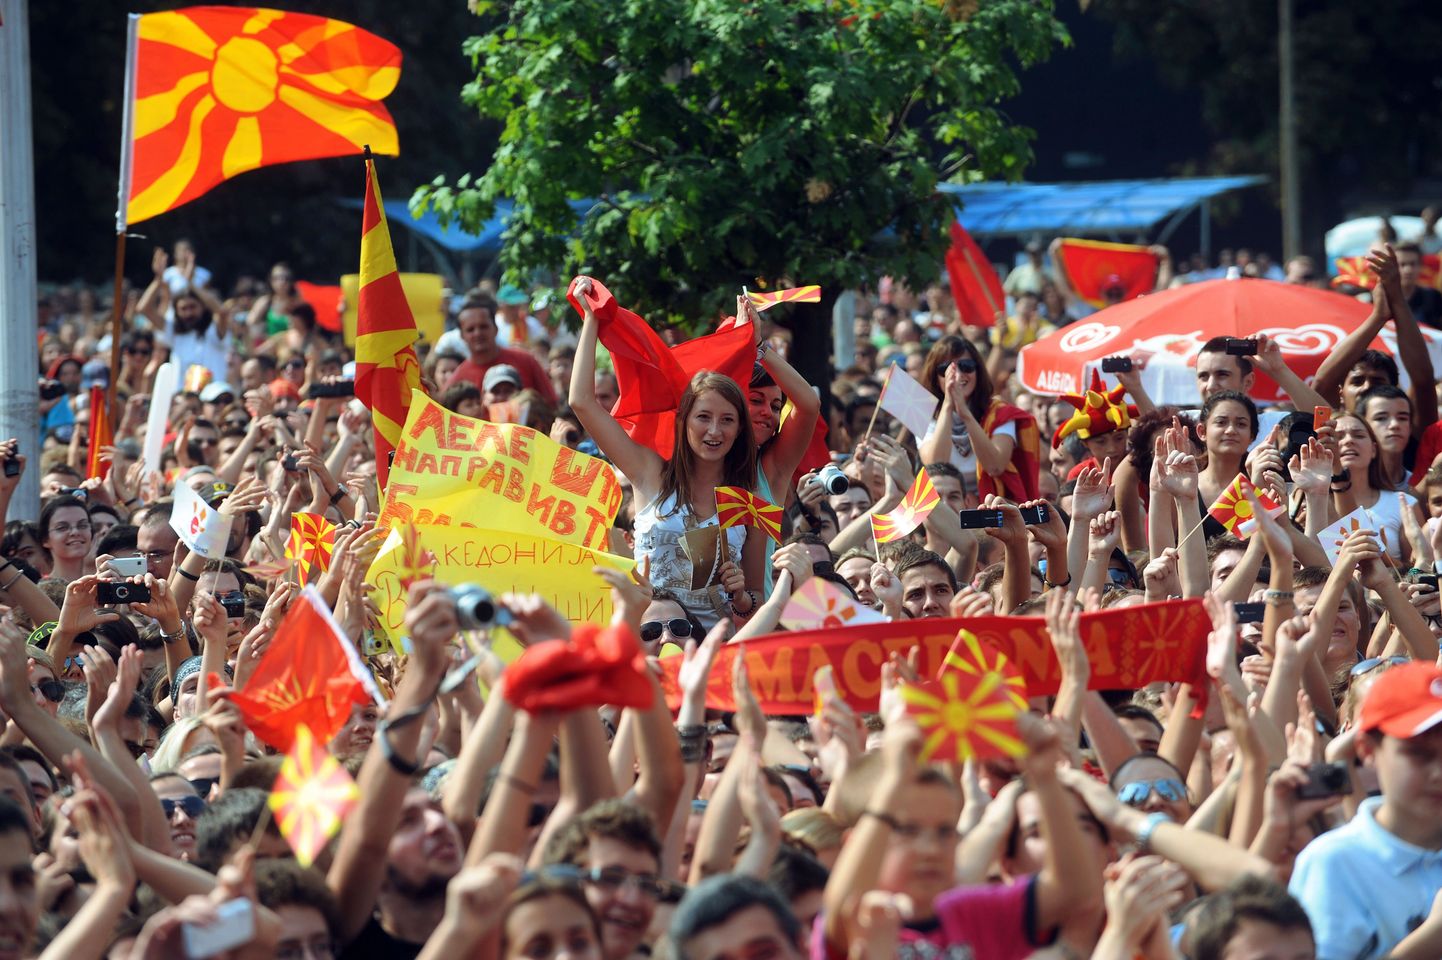 Tens of thousands of Macedonians celebrate the European success of the Macedonian national basketball team after their triumphant return home to Skopje, on September 19, 2011. The Macedonian basketball team won the high fourth place in the European Basketball Championship in Lithuania, causing sensation across the continent. Tens of thousands of Macedonians today celebrated the European success on the Skopje central square with the members of the national basketball team. AFP PHOTO/ROBERT ATANASOVSKI